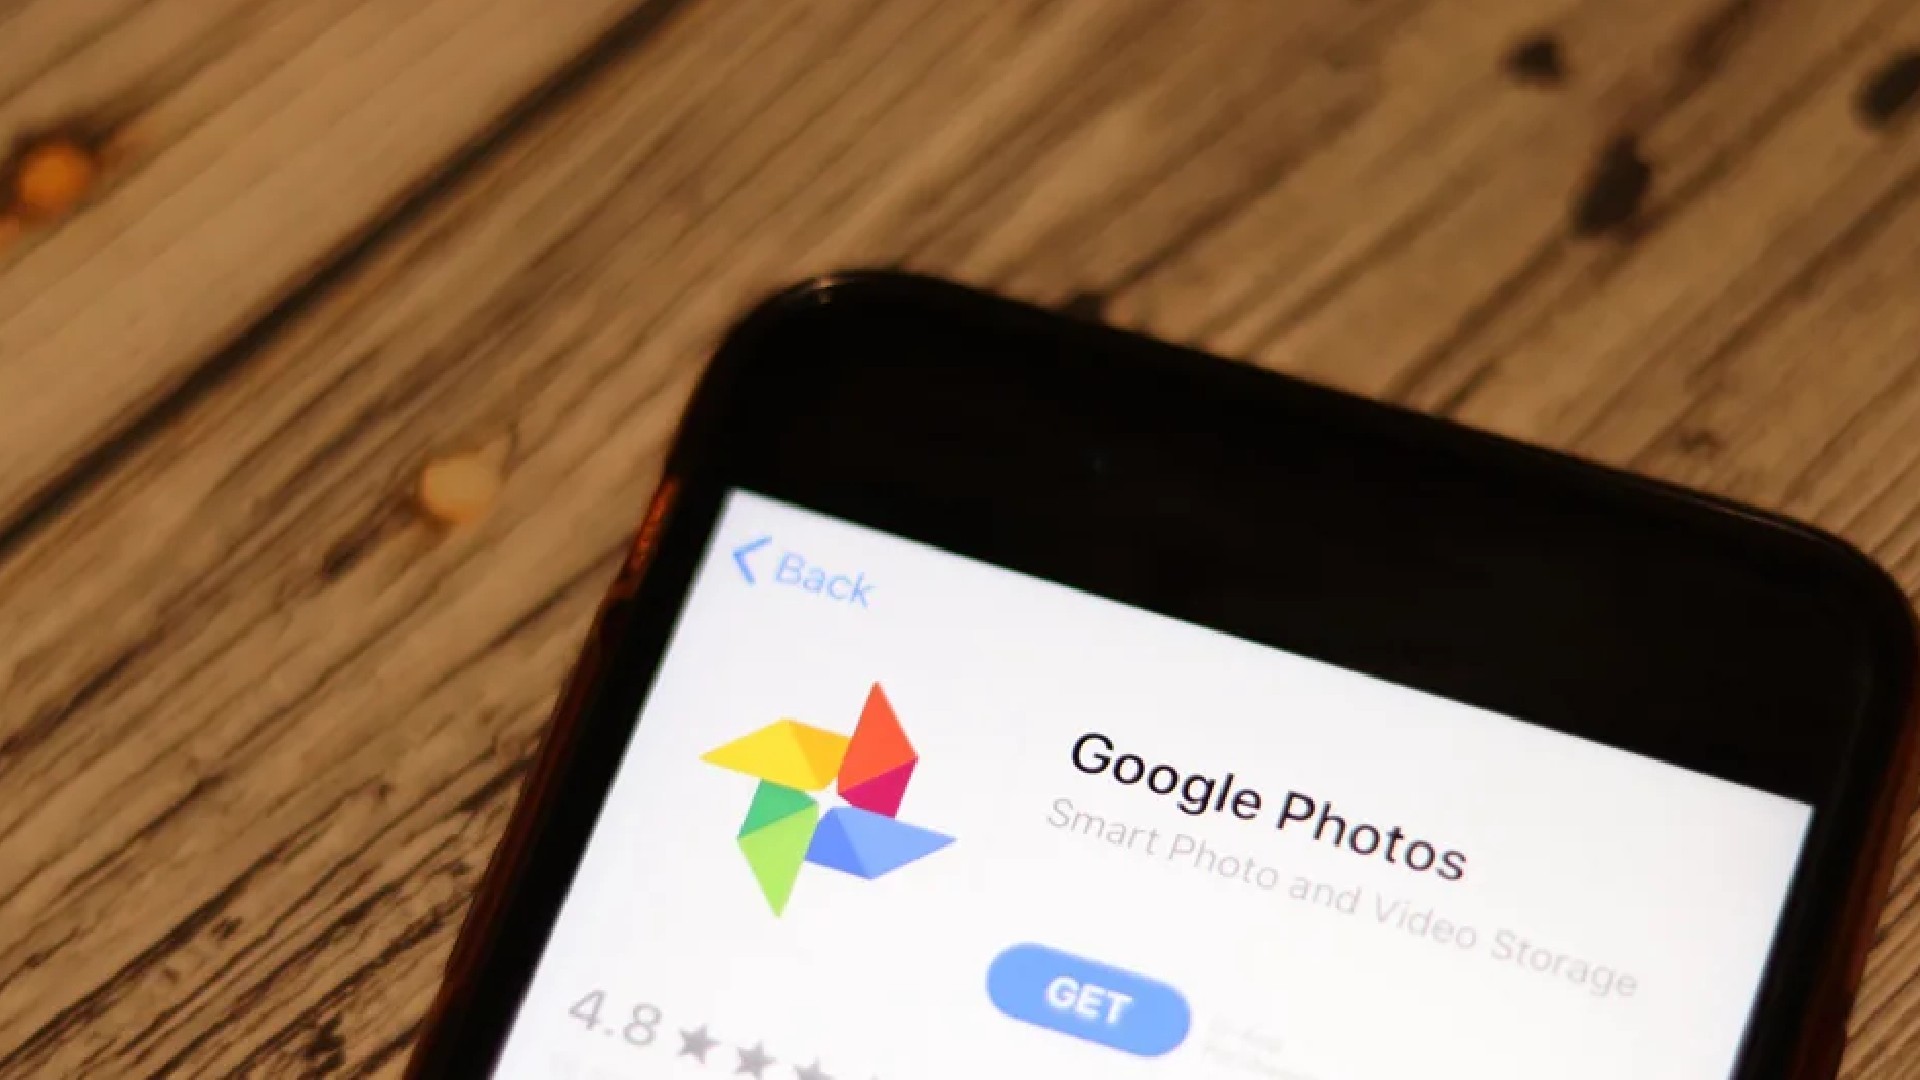 Google Photos Introduces New Tool To Weed Out Blurry Photos And Save Drive Storage